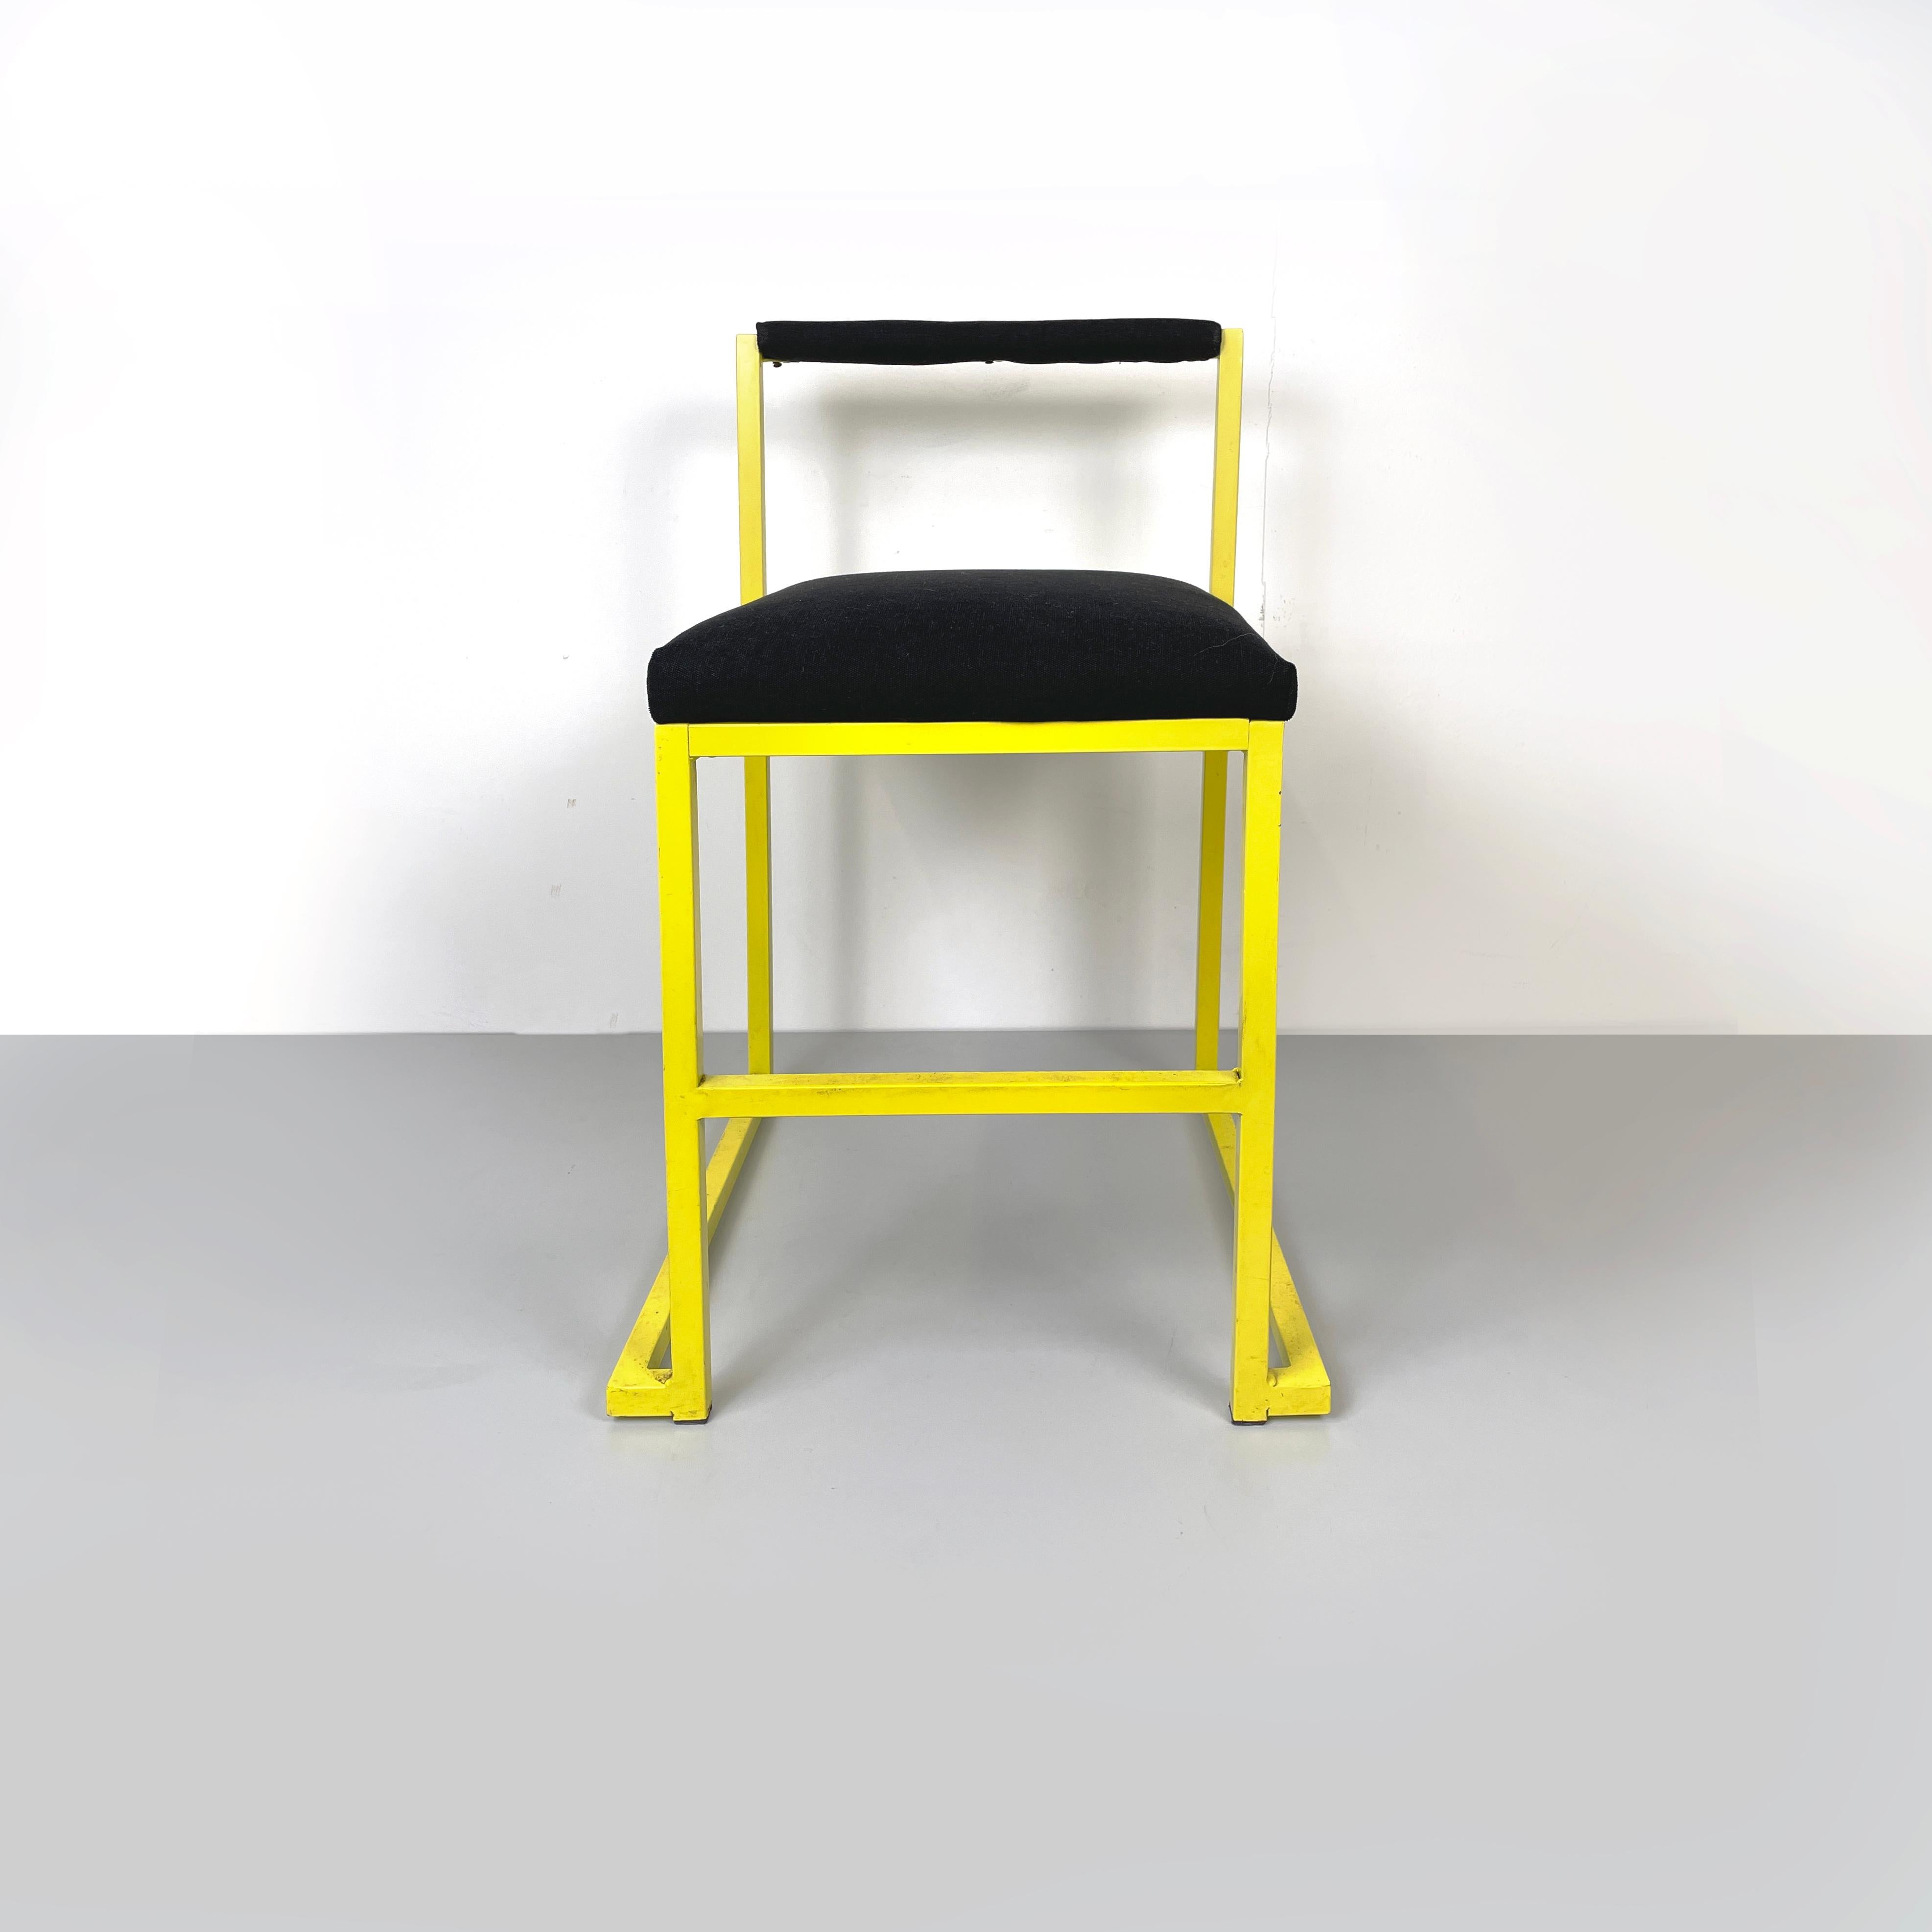 Italian modern Rectangular chair with black fabric and yellow metal, 1980s
Chair with rectangular seat and backrest, padded and covered in black fabric. The square section structure is in yellow painted metal. On the front there is a footrest.
1980